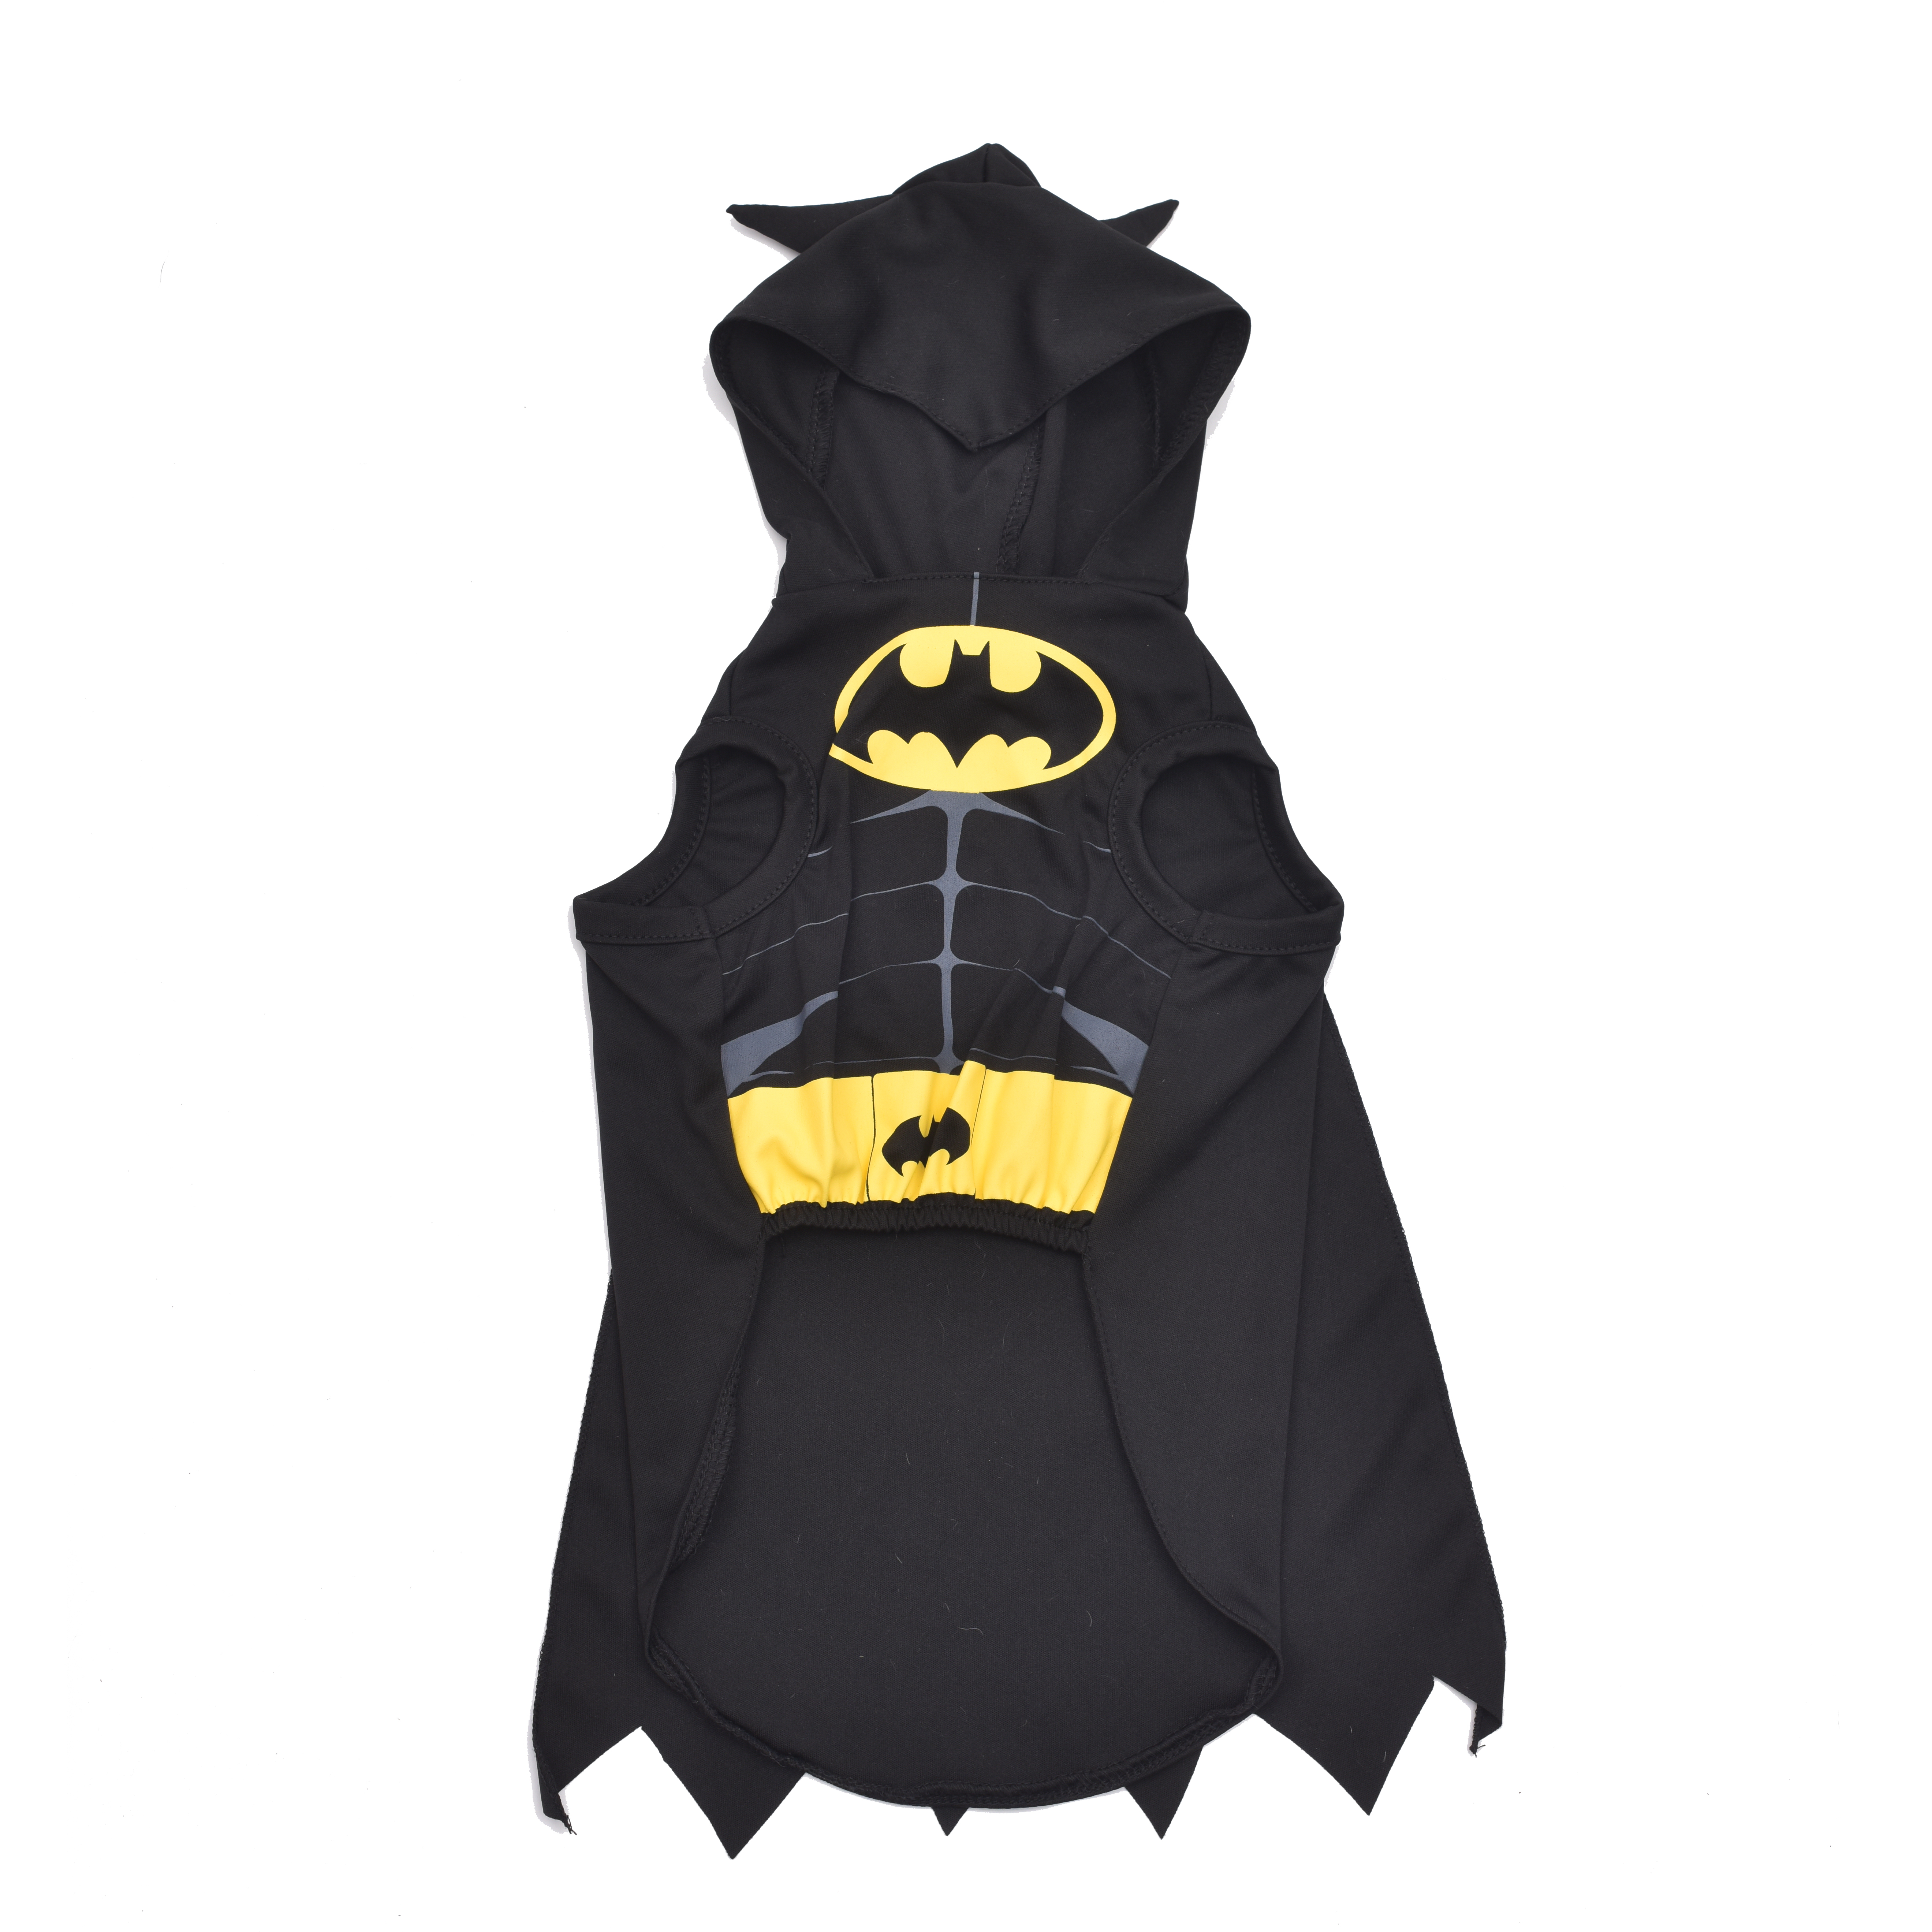 Black Dog Halloween Costumes for Small Dogs in Size X-Small for Small Dogs & Small Size Dog Breeds DC Comics Batman Dog Costume See Sizing Chart for More Info Hooded Superhero Costume for Dogs 